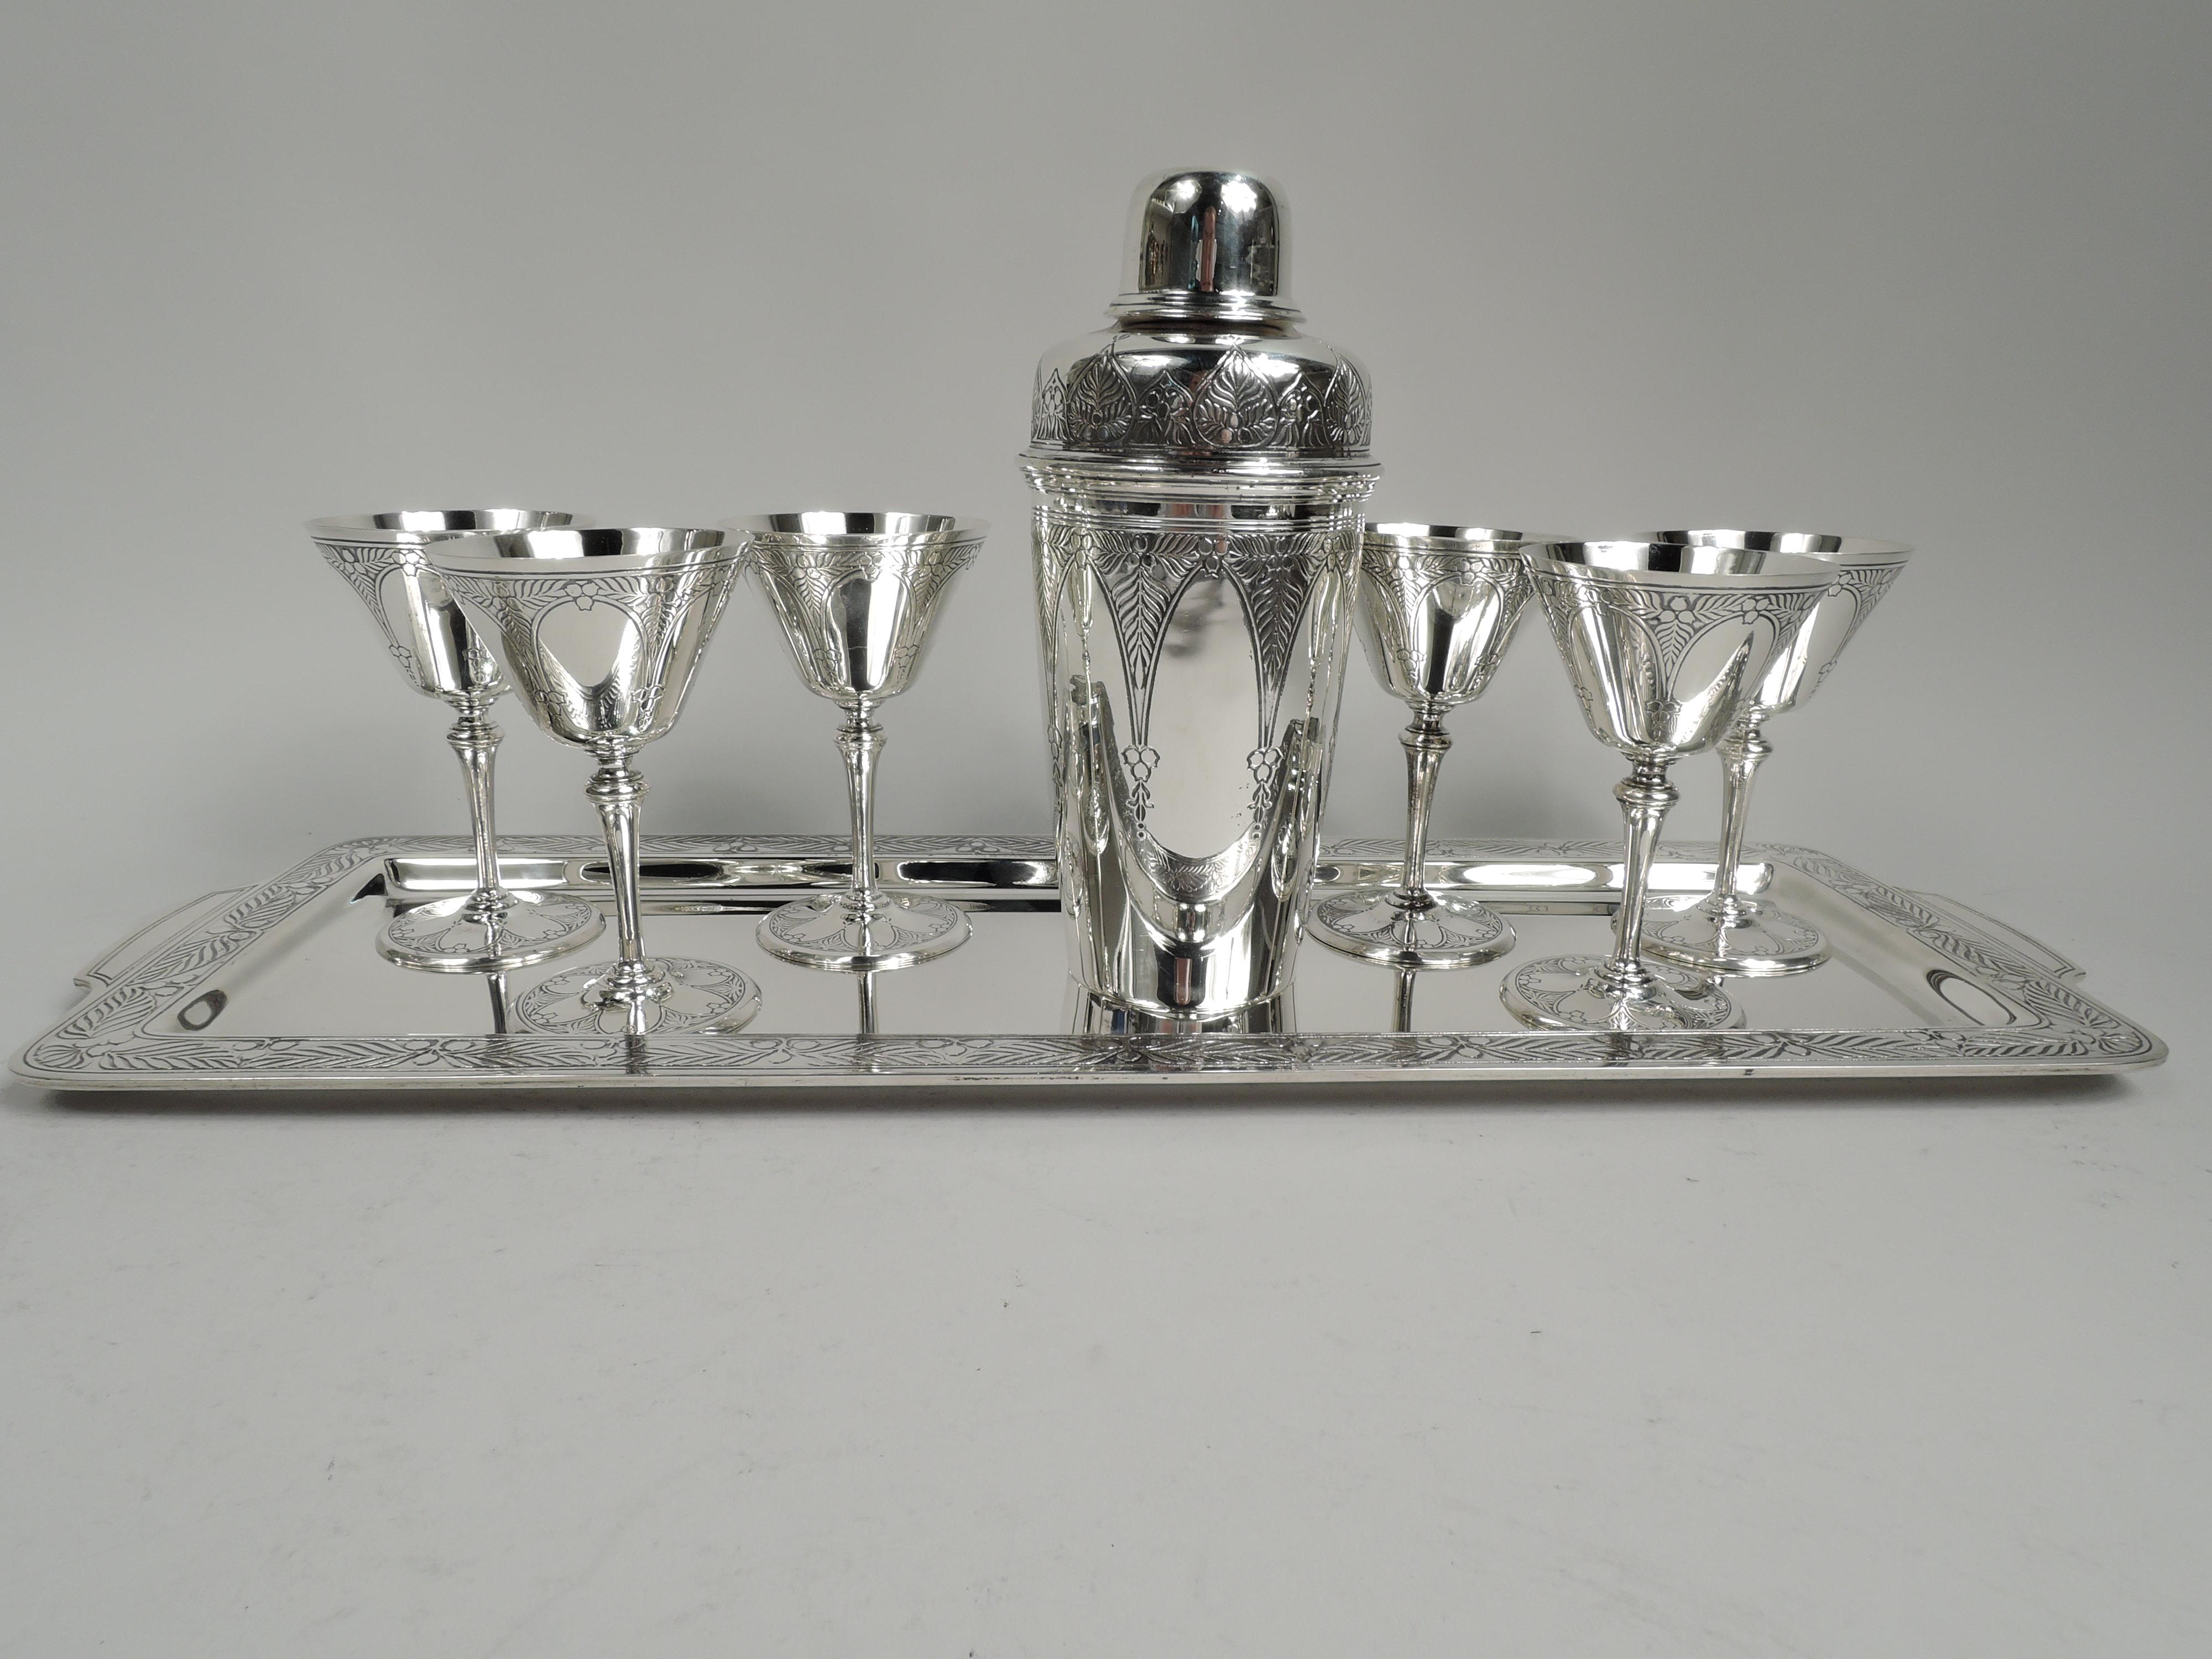 Art Deco sterling silver bar set. Made by Tiffany & Co. in New York, ca 1925. This set comprises cocktail shaker and 6 cups on tray. Shaker: Tapering bowl and detachable top with curved shoulder and short inset neck with tracery-style strainer and